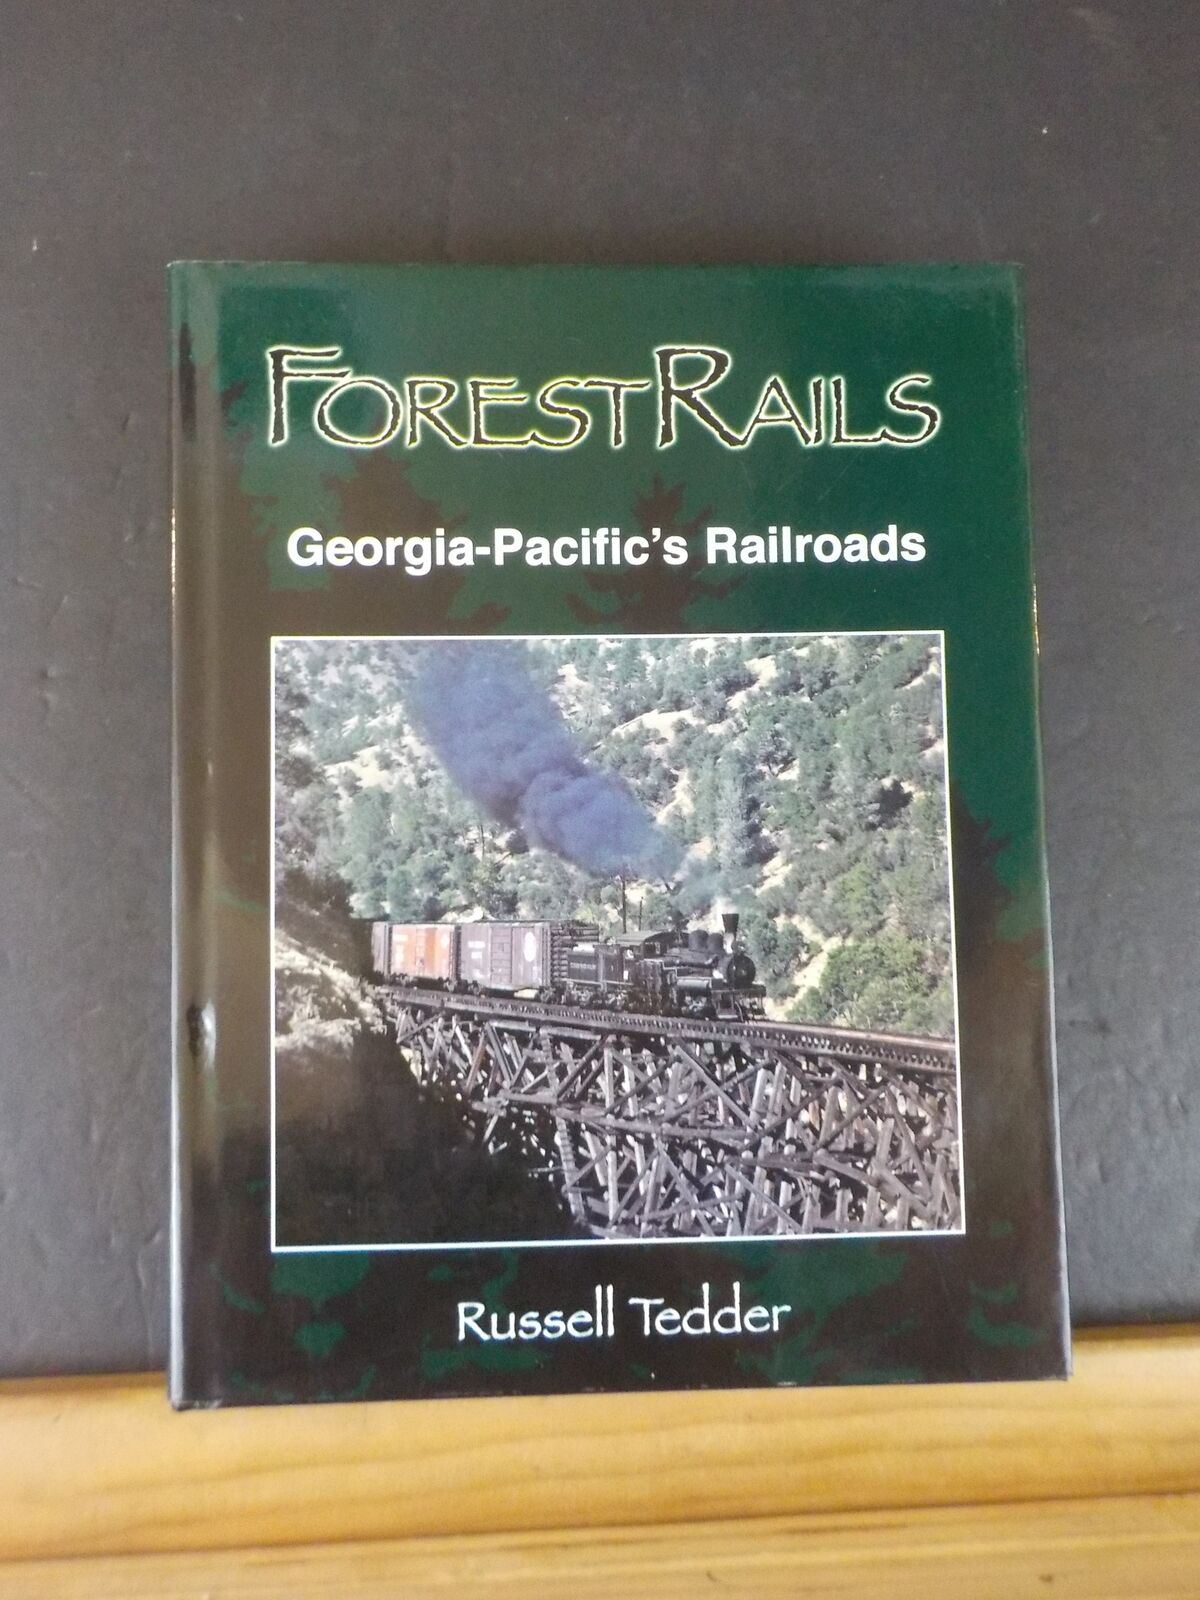 Forest Rails Georgia-Pacific’s Railroad by Russell Tedder   w/ dust jacket